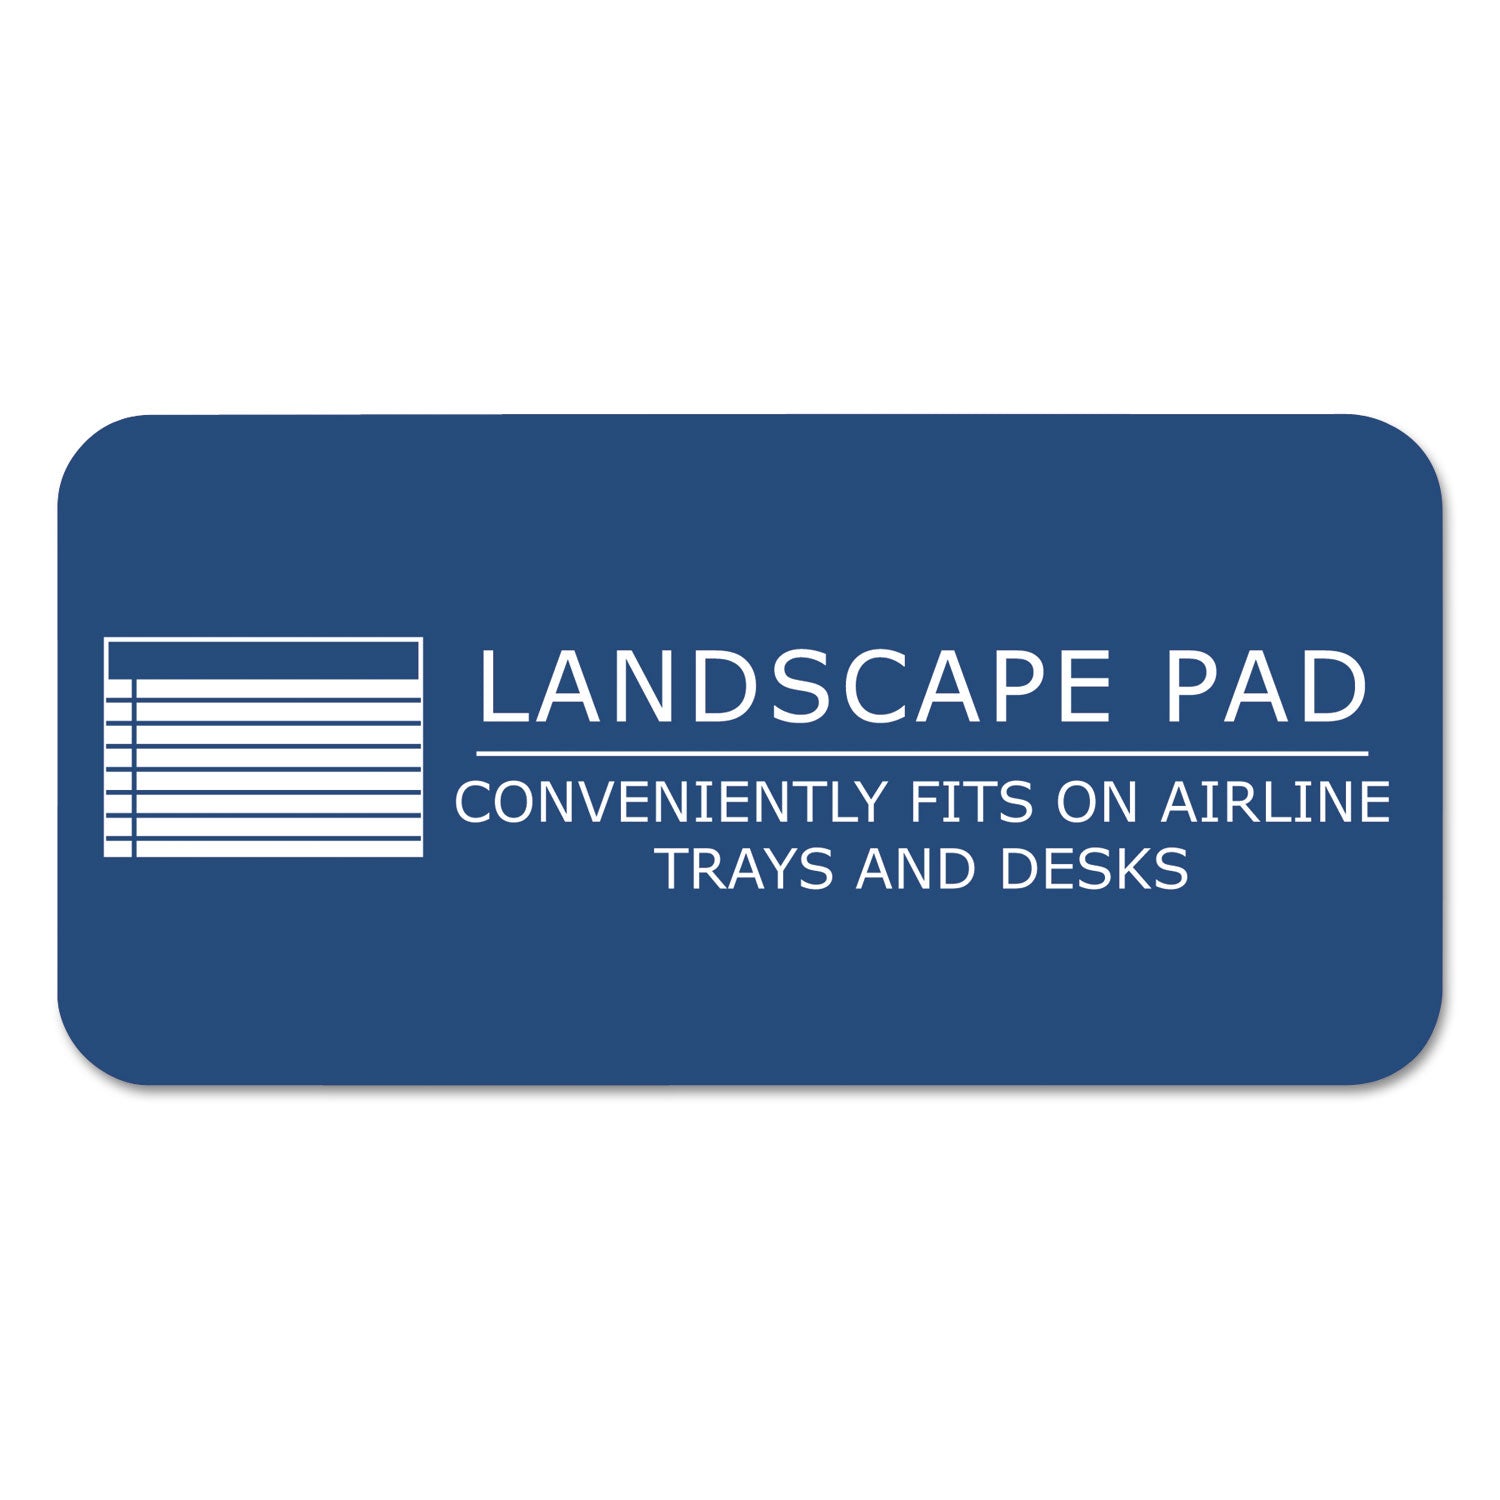 WIDE Landscape Format Writing Pad, Unpunched with Standard Back, Medium/College Rule, 40 White 11 x 9.5 Sheets - 